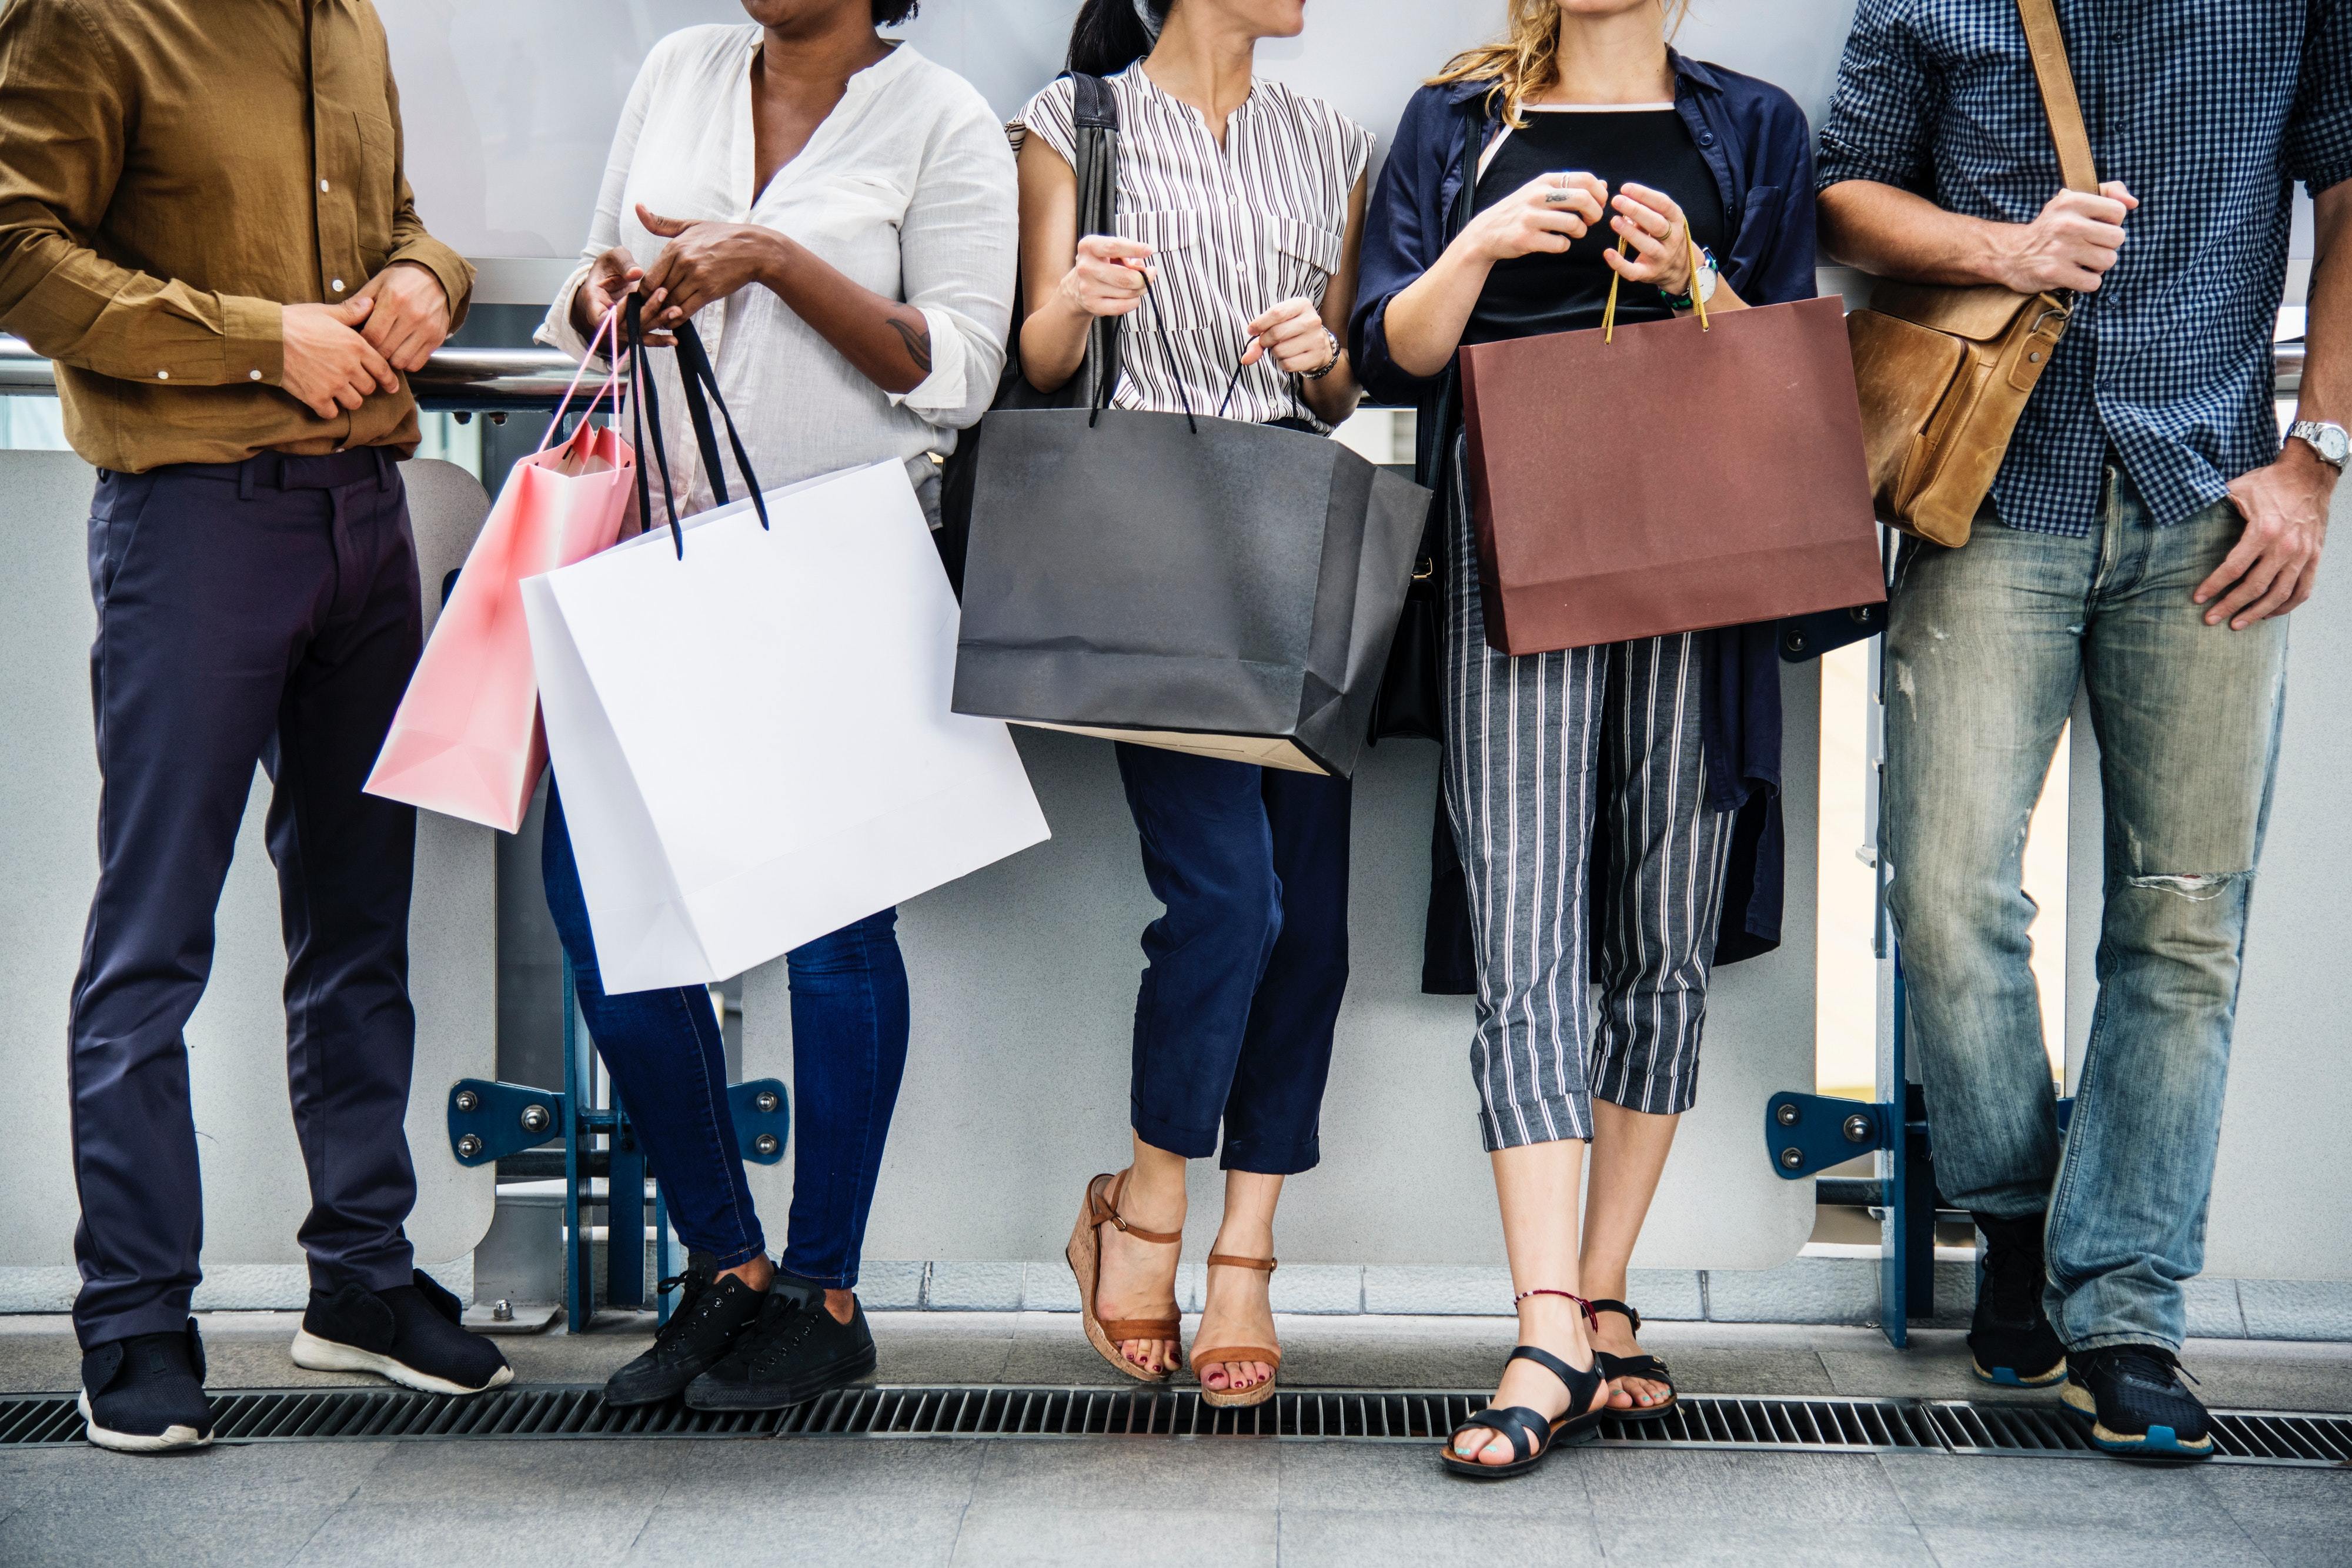 What You Need to Know About Mystery Shopping in Under 90 Seconds